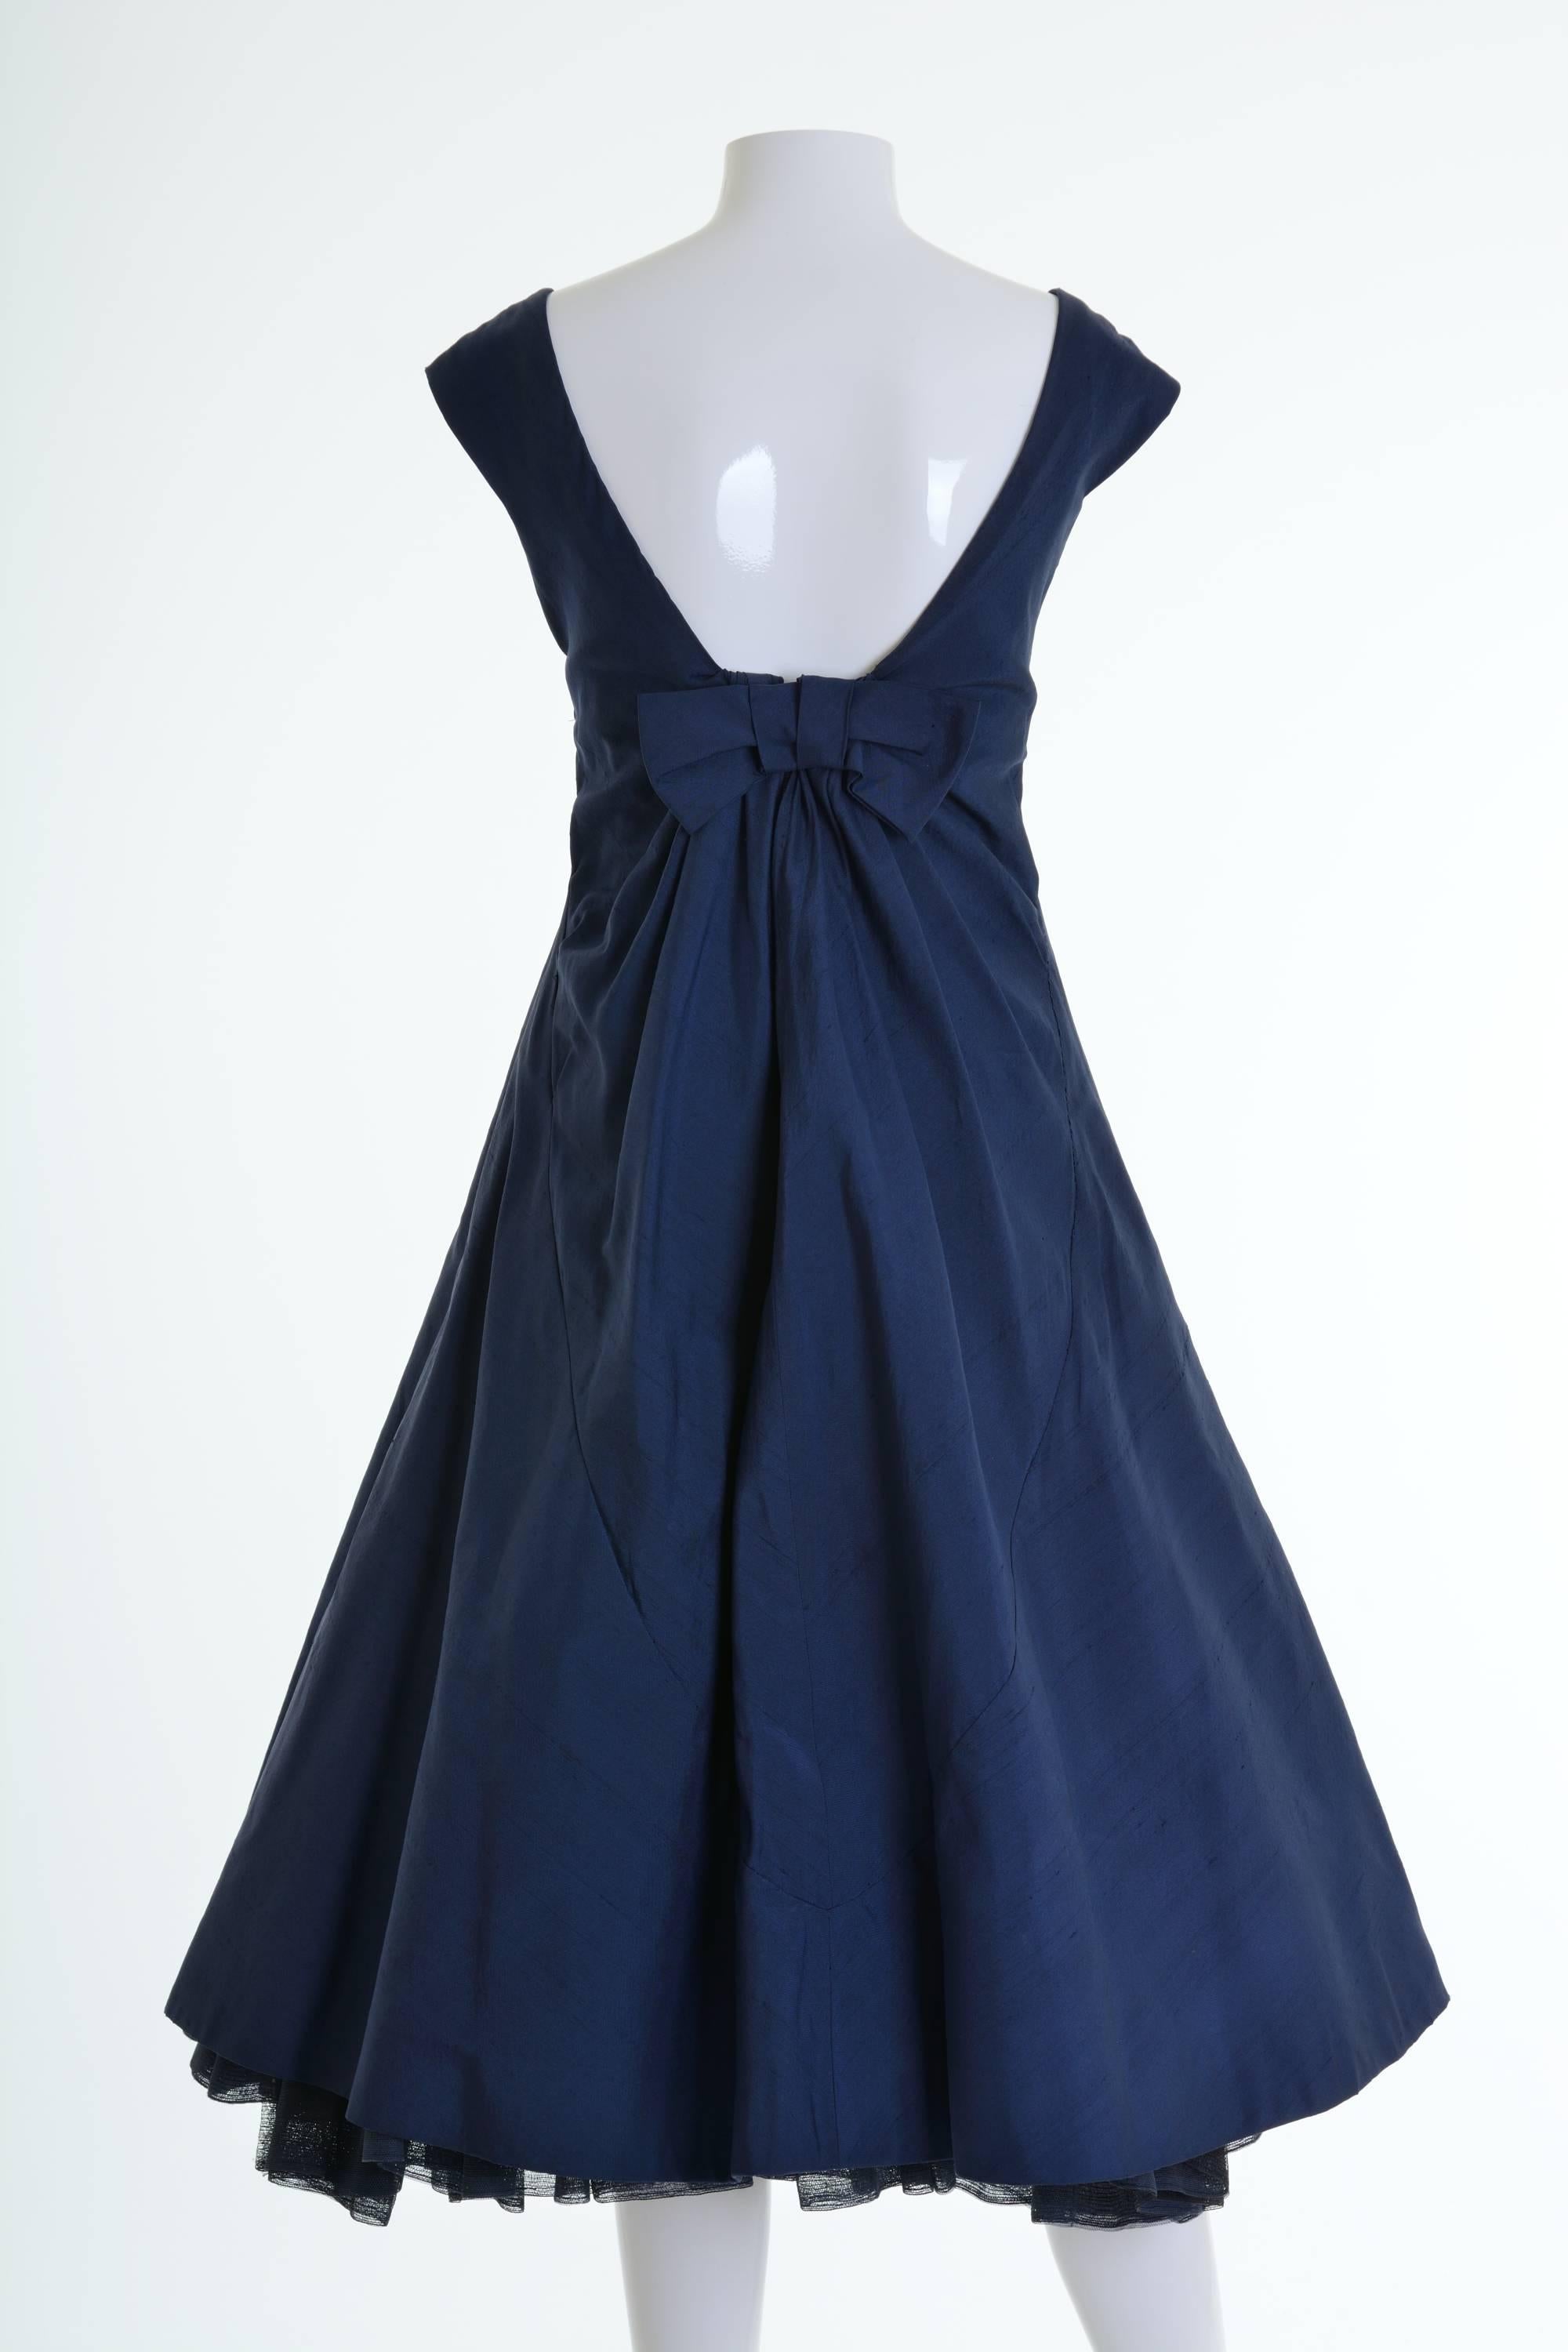 This amazing 1950s cocktail dress is in a blue silk taffeta fabric. It has full pleateds circle skirt with crinoline petticoat and boning corset inside. It has back double zip closure and hooks.

Giuseppina Tizzoni born in 1889. He opened his own